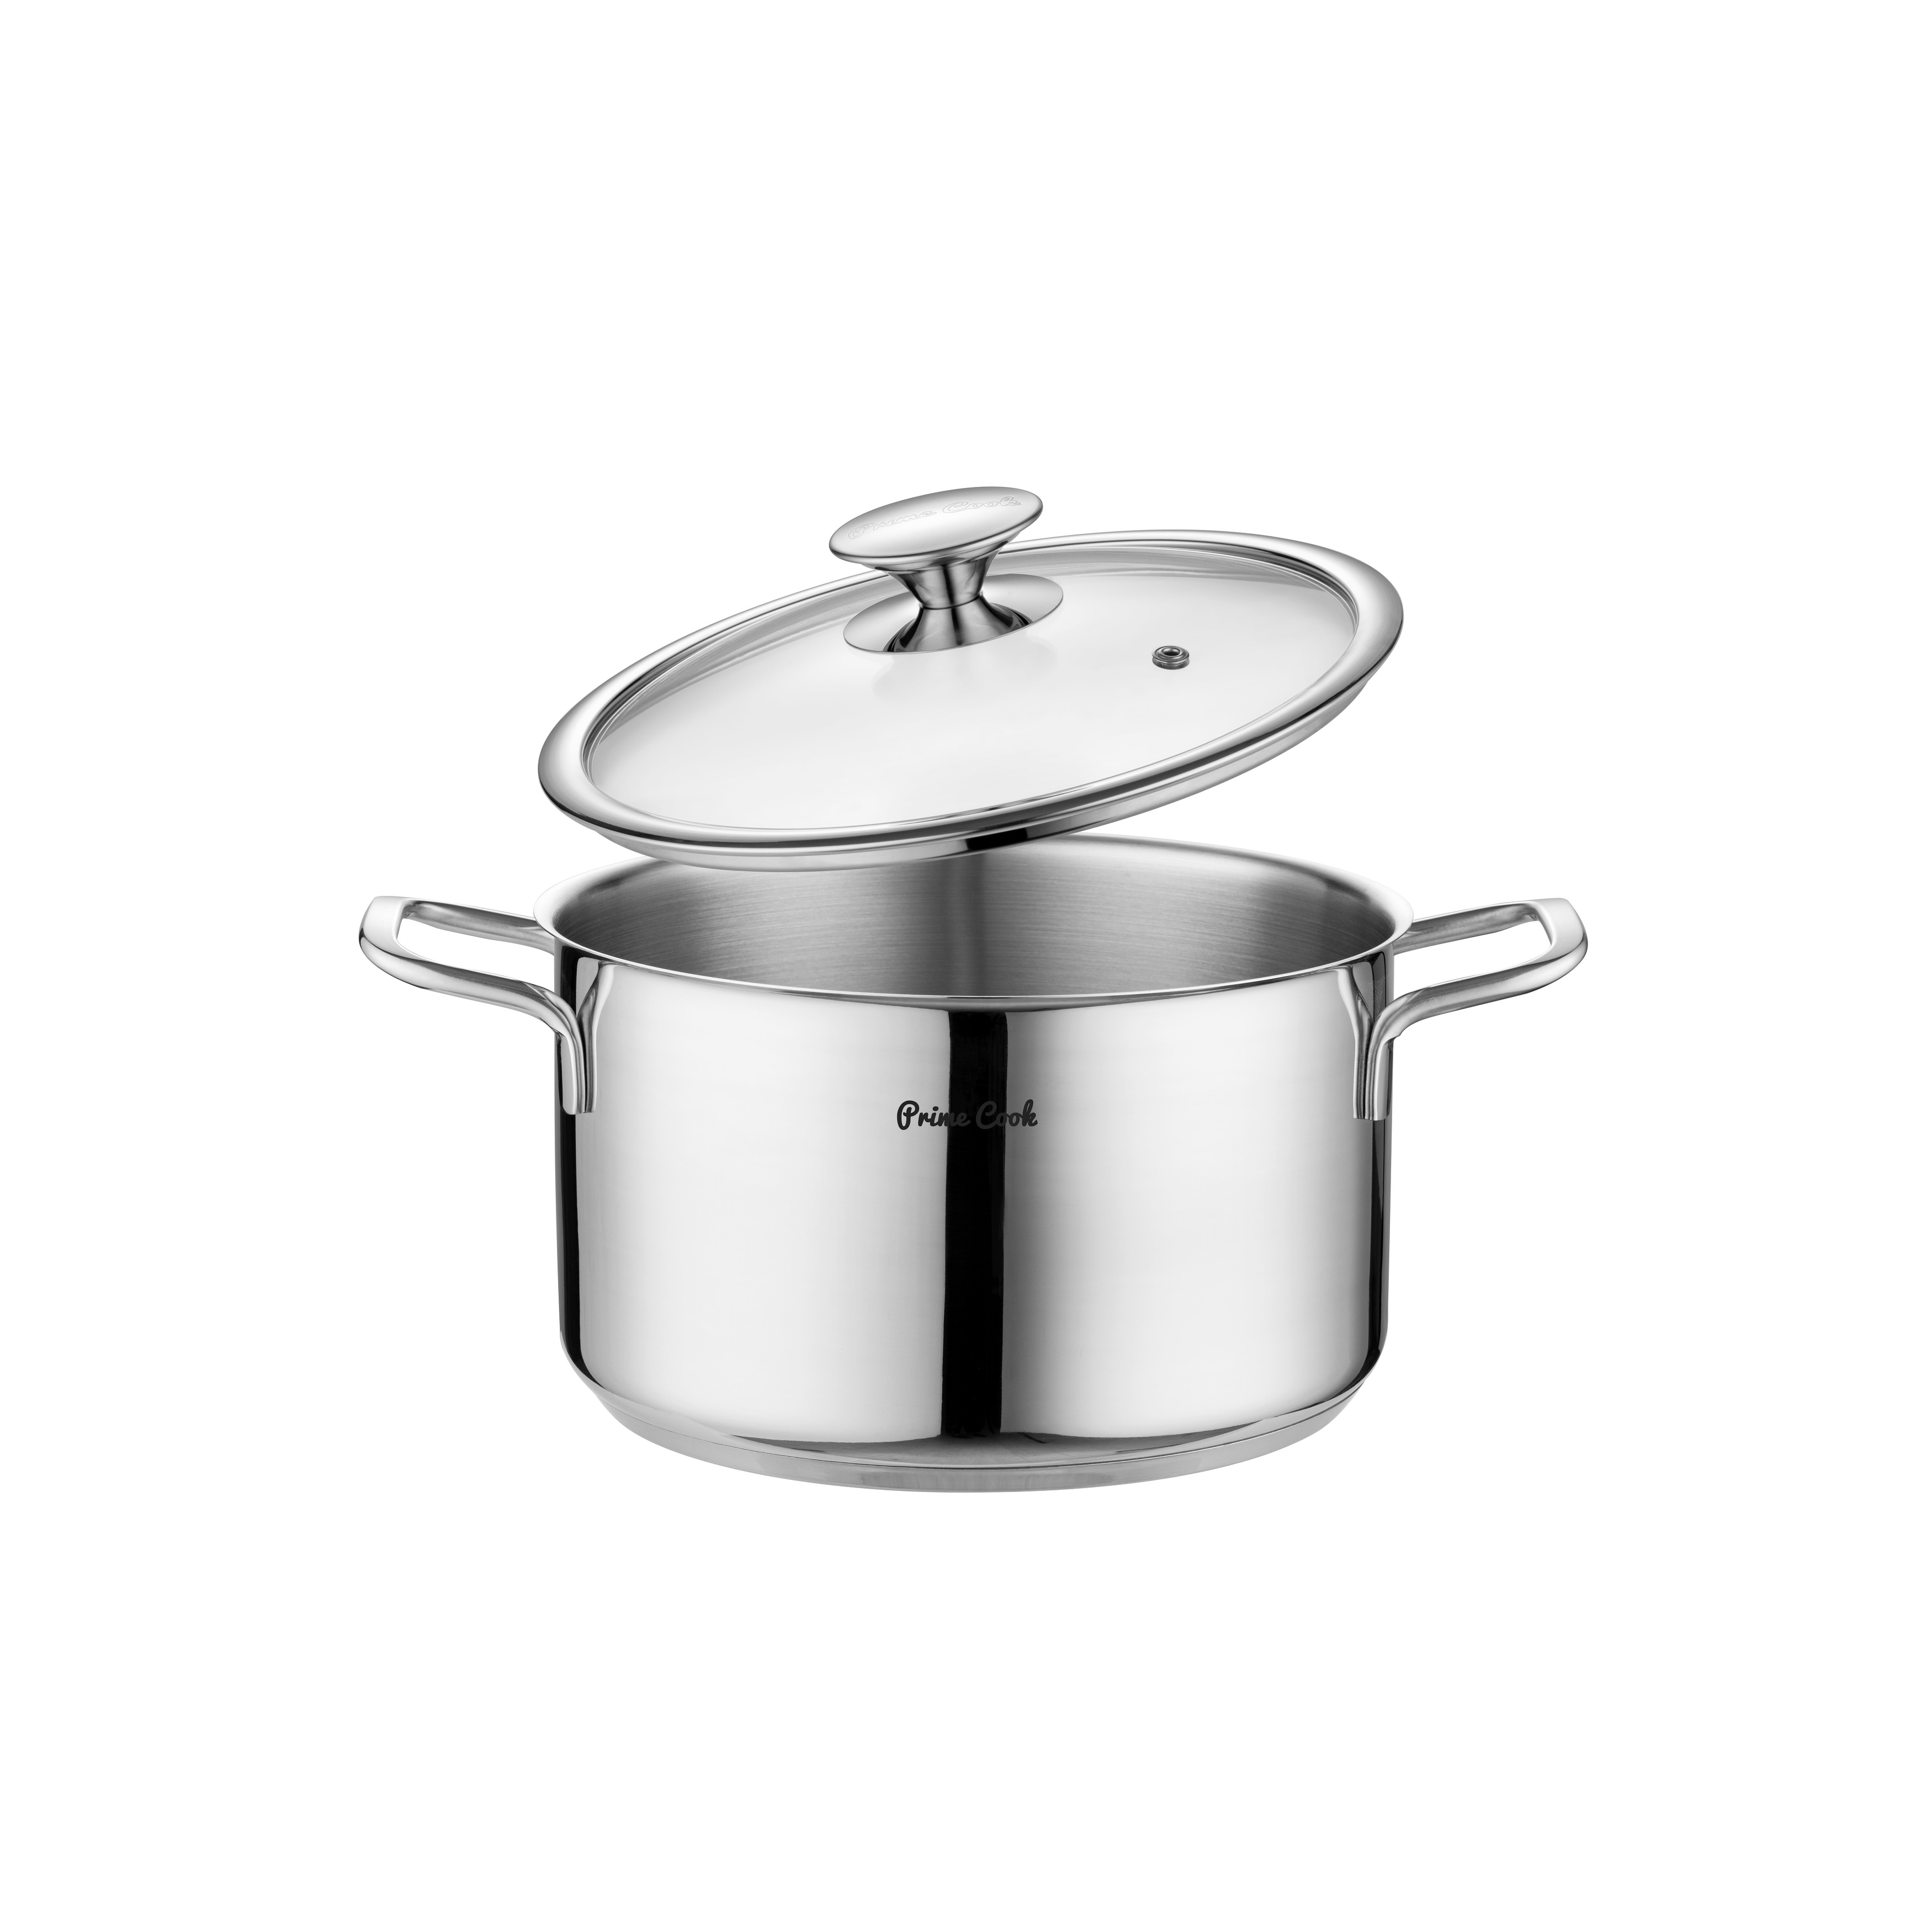 https://ak1.ostkcdn.com/images/products/is/images/direct/00a61a9c8974c48868d14fa65275f1754b8abbfa/Prime-Cook-4-qt.-Stainless-Steel-Soup-Pot-with-Lid.jpg